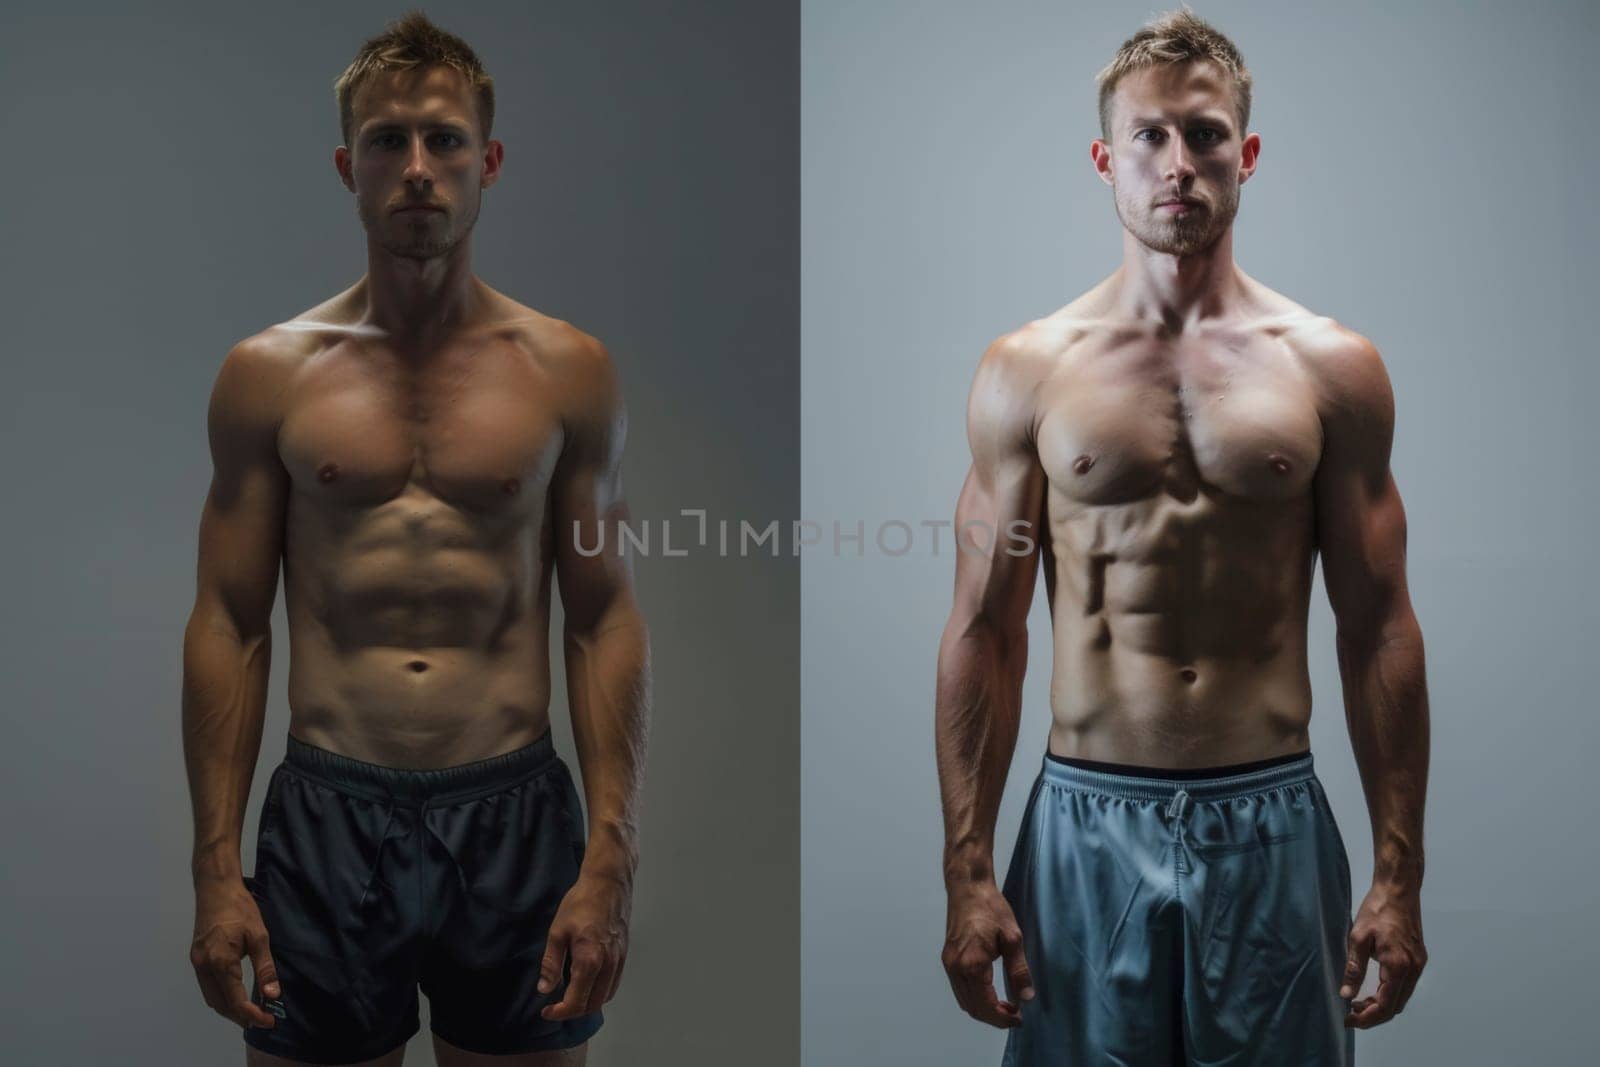 This image juxtaposes a man's fitness progress in a before and after format. It emphasizes the muscular gains and lean physique achieved through training